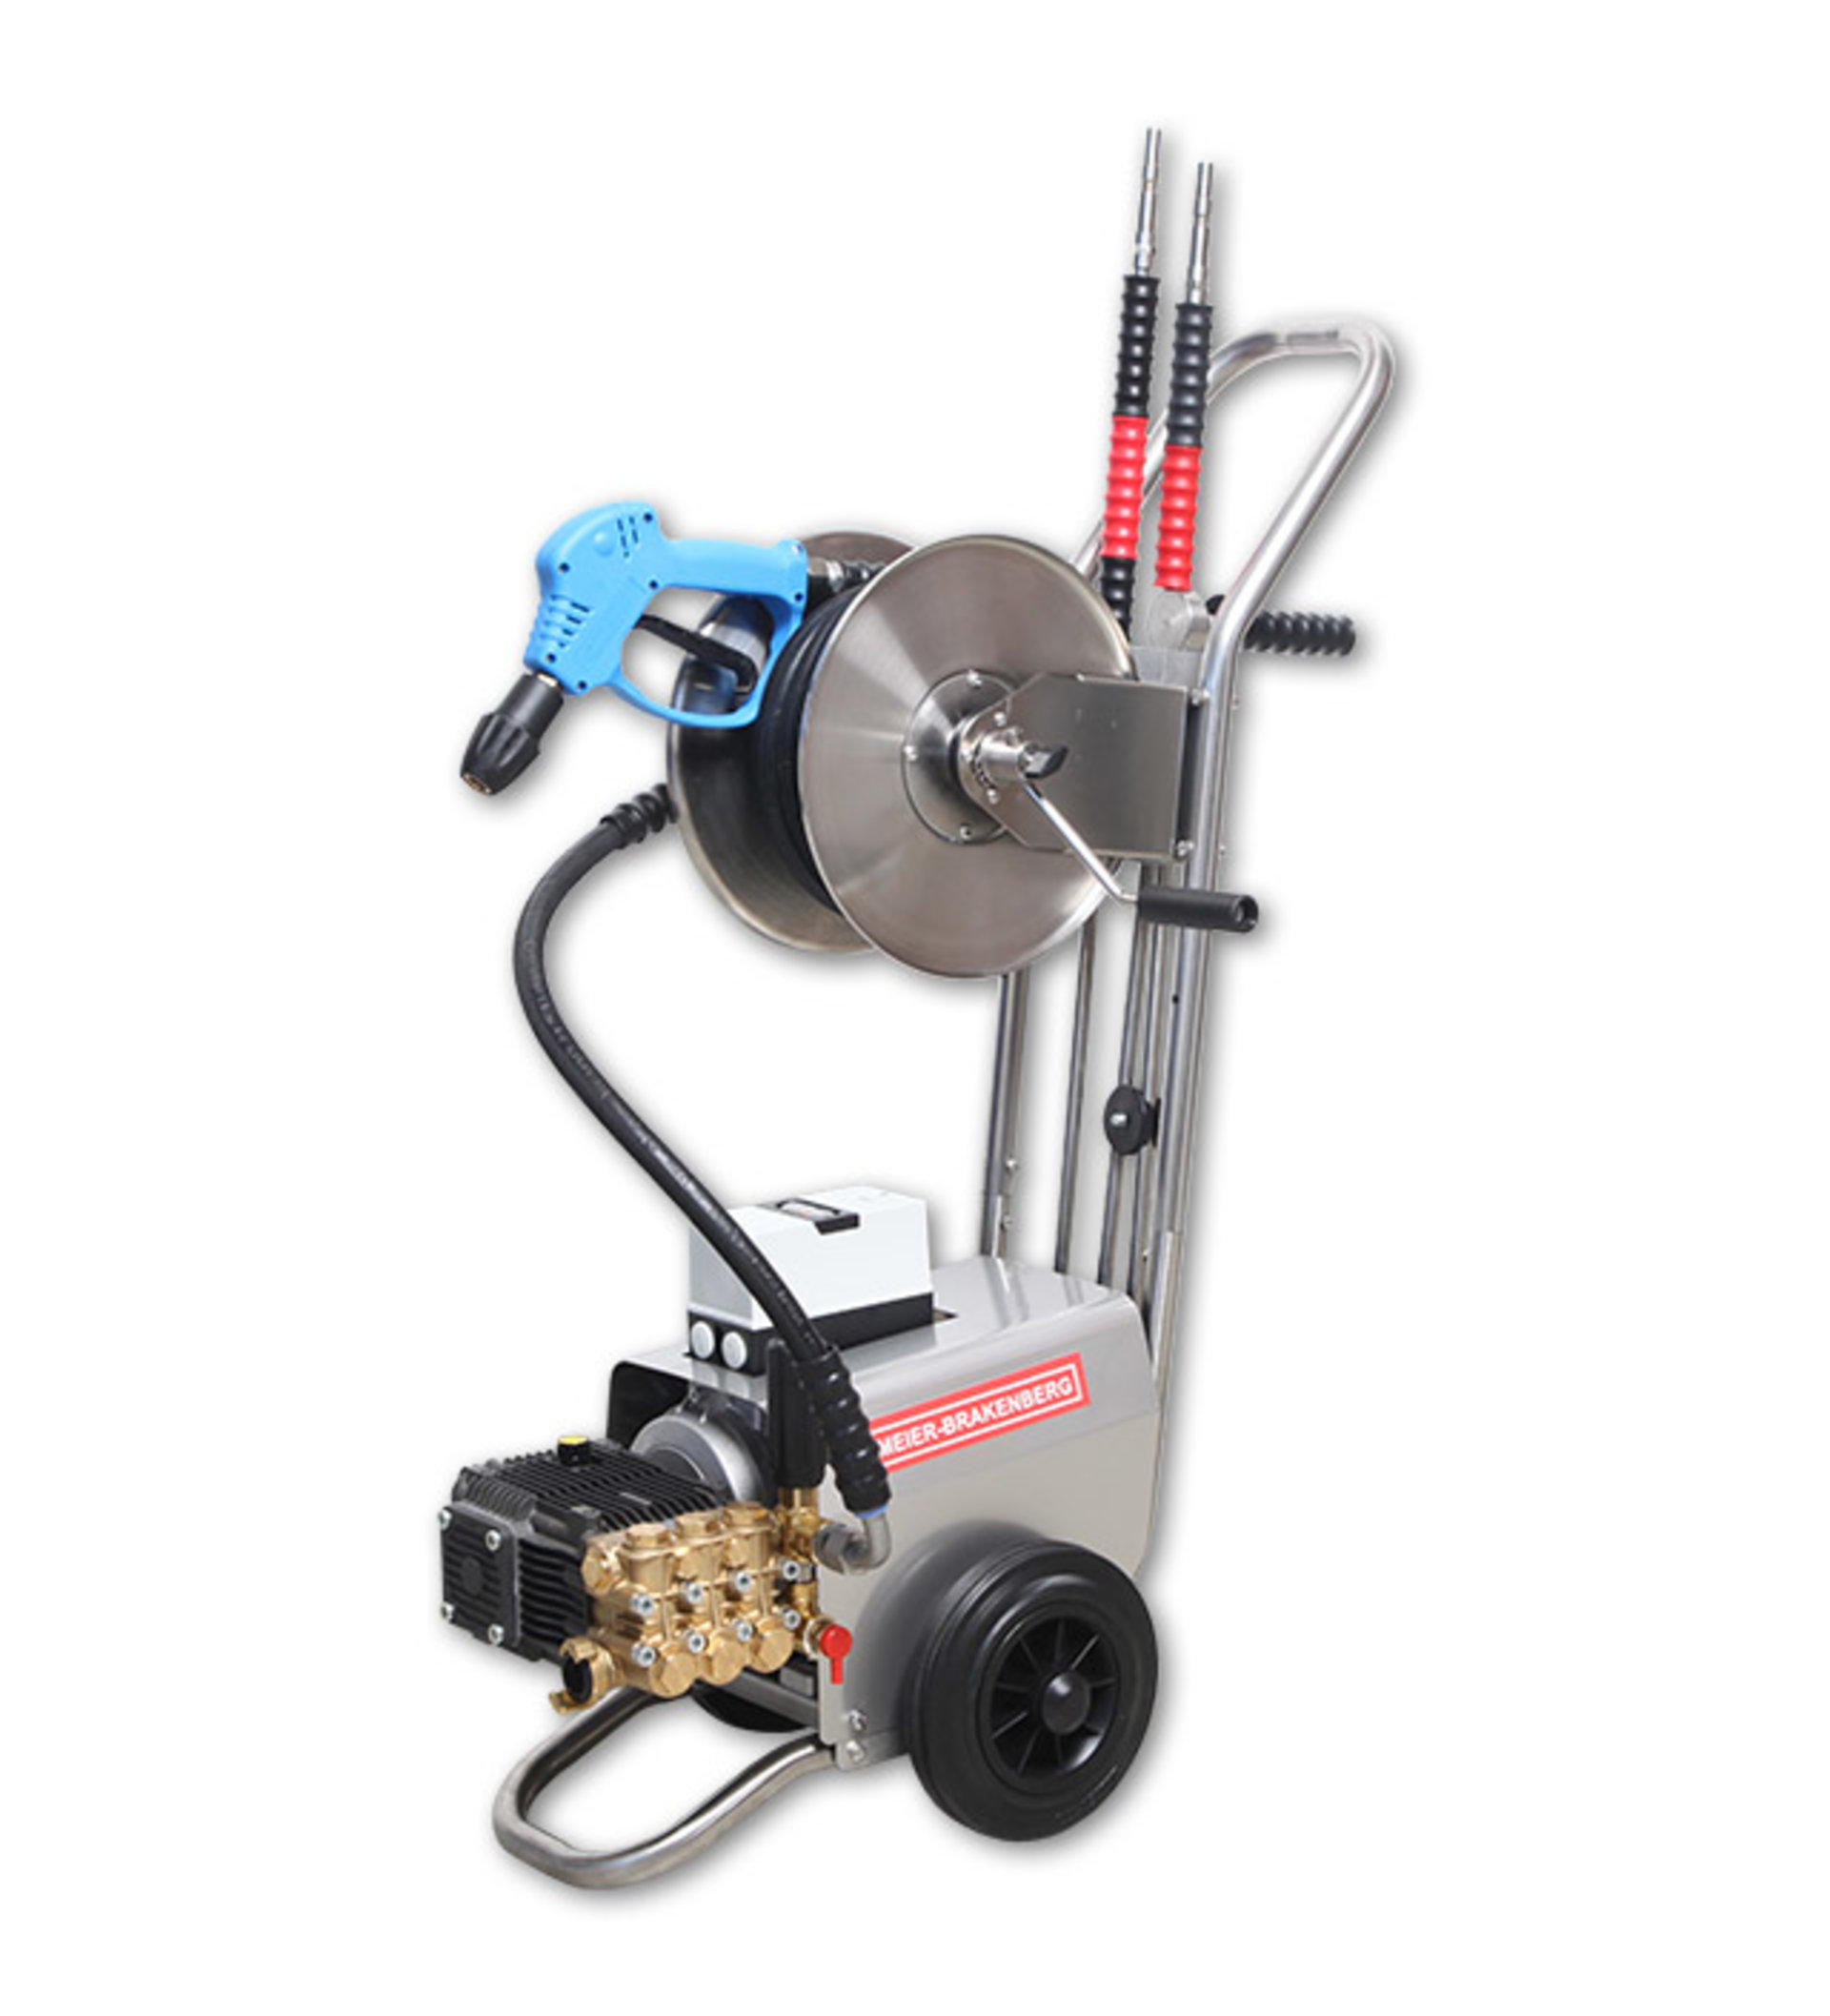 The new compact MBH 900 professional high pressure cleaner is ideal for applications where space is at a premium, such as milking parlours on dairy farms.